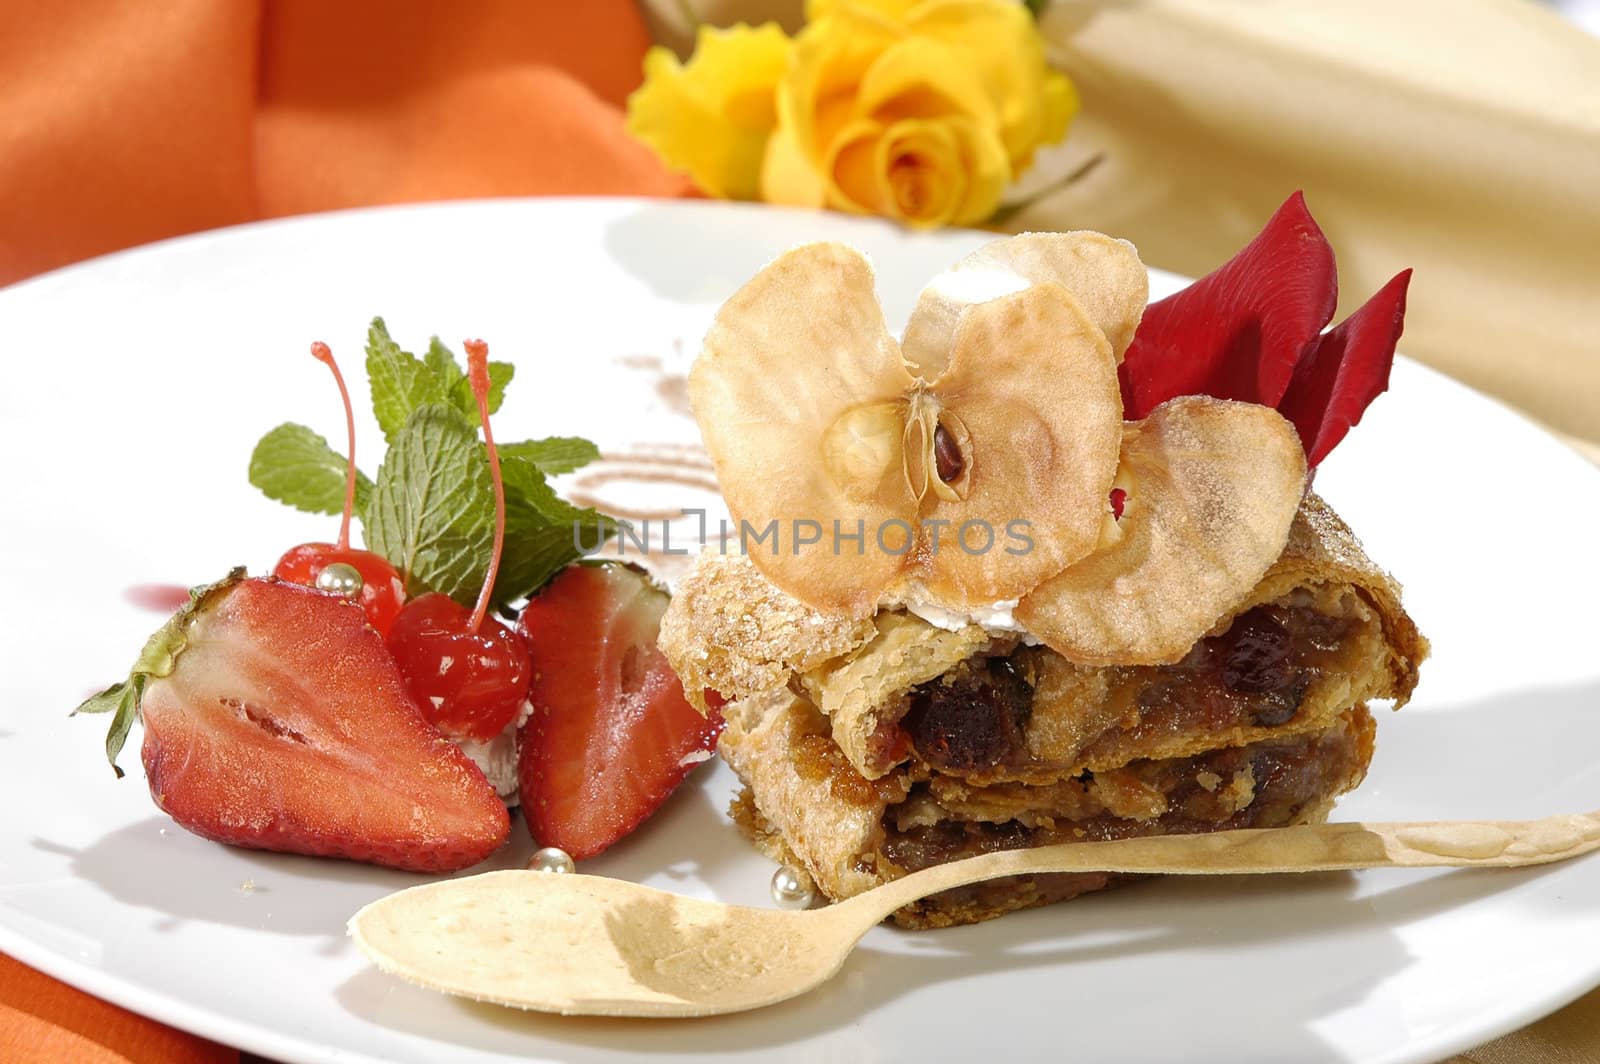 luxurious dessert is a meat loaf with filling and saccharine fruit